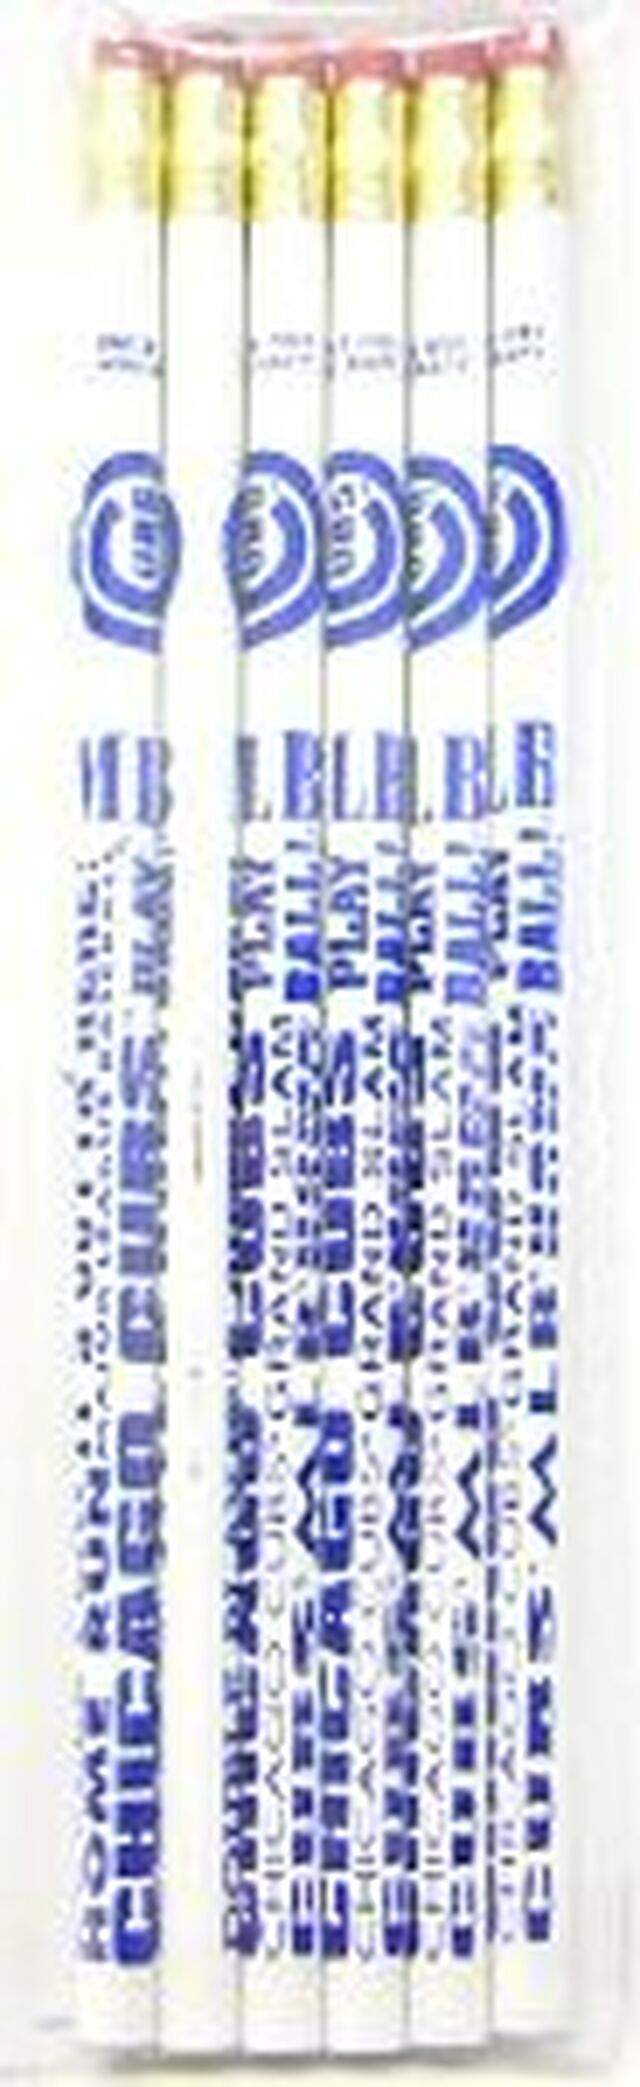 Chicago Cubs 2 Pack of Pencils - 6 per pack by Wincraft